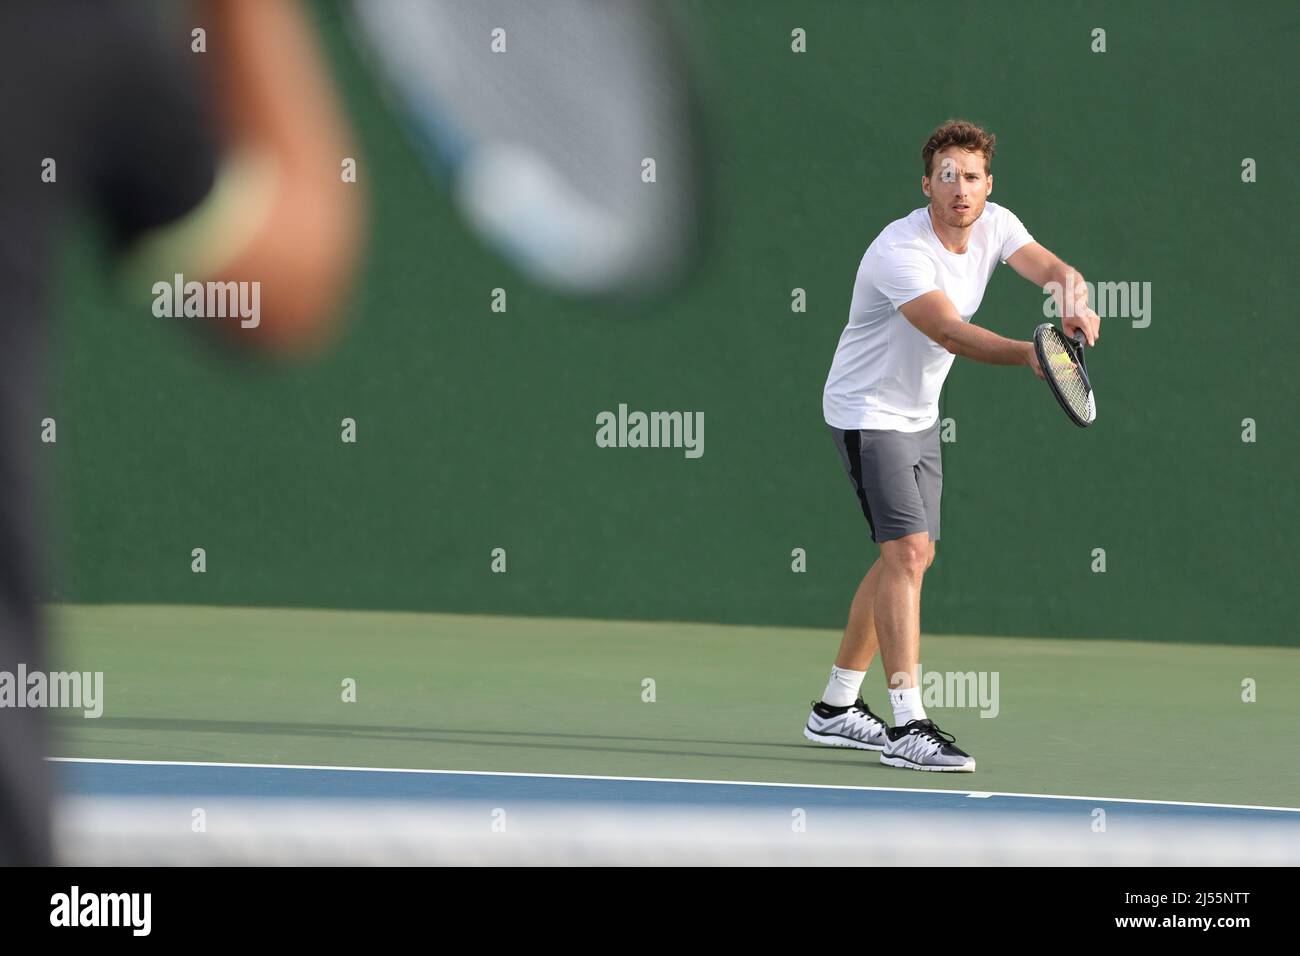 Tennis serve player man serving ball during match point on outdoor green court. Two men athlete playing sport game training doing exercise Stock Photo